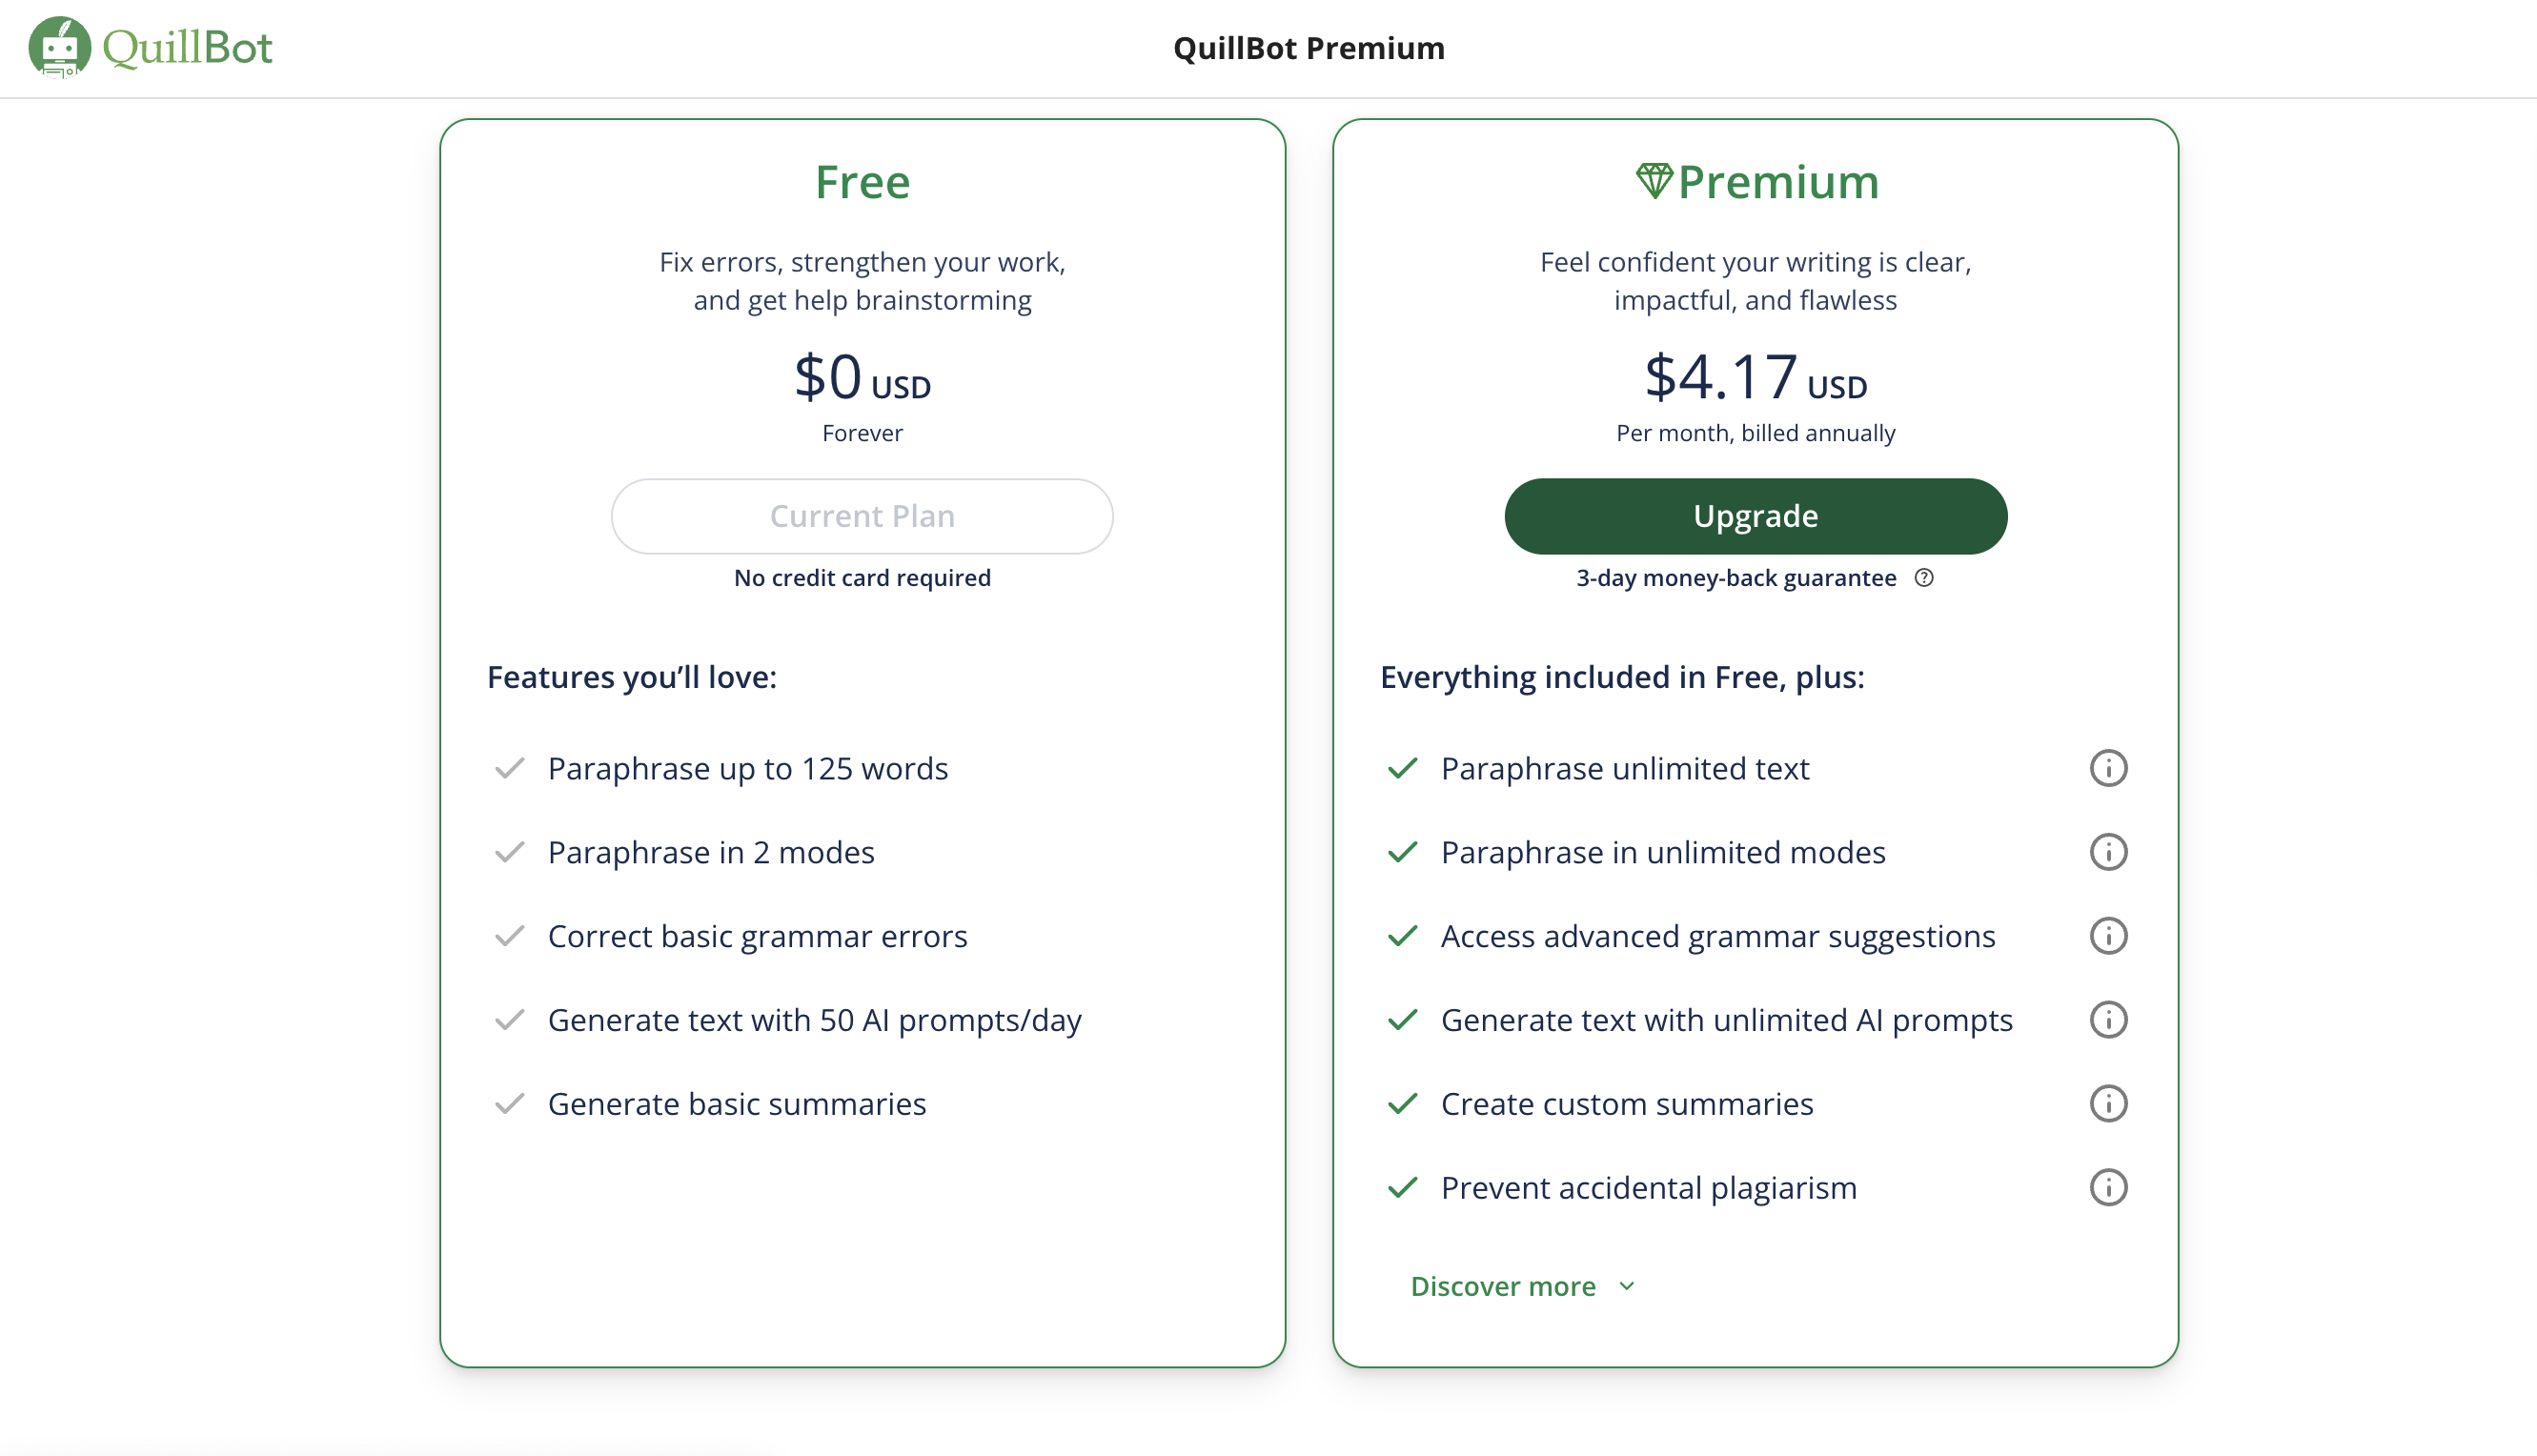 A screenshot of the premium plan's features at QuillBot